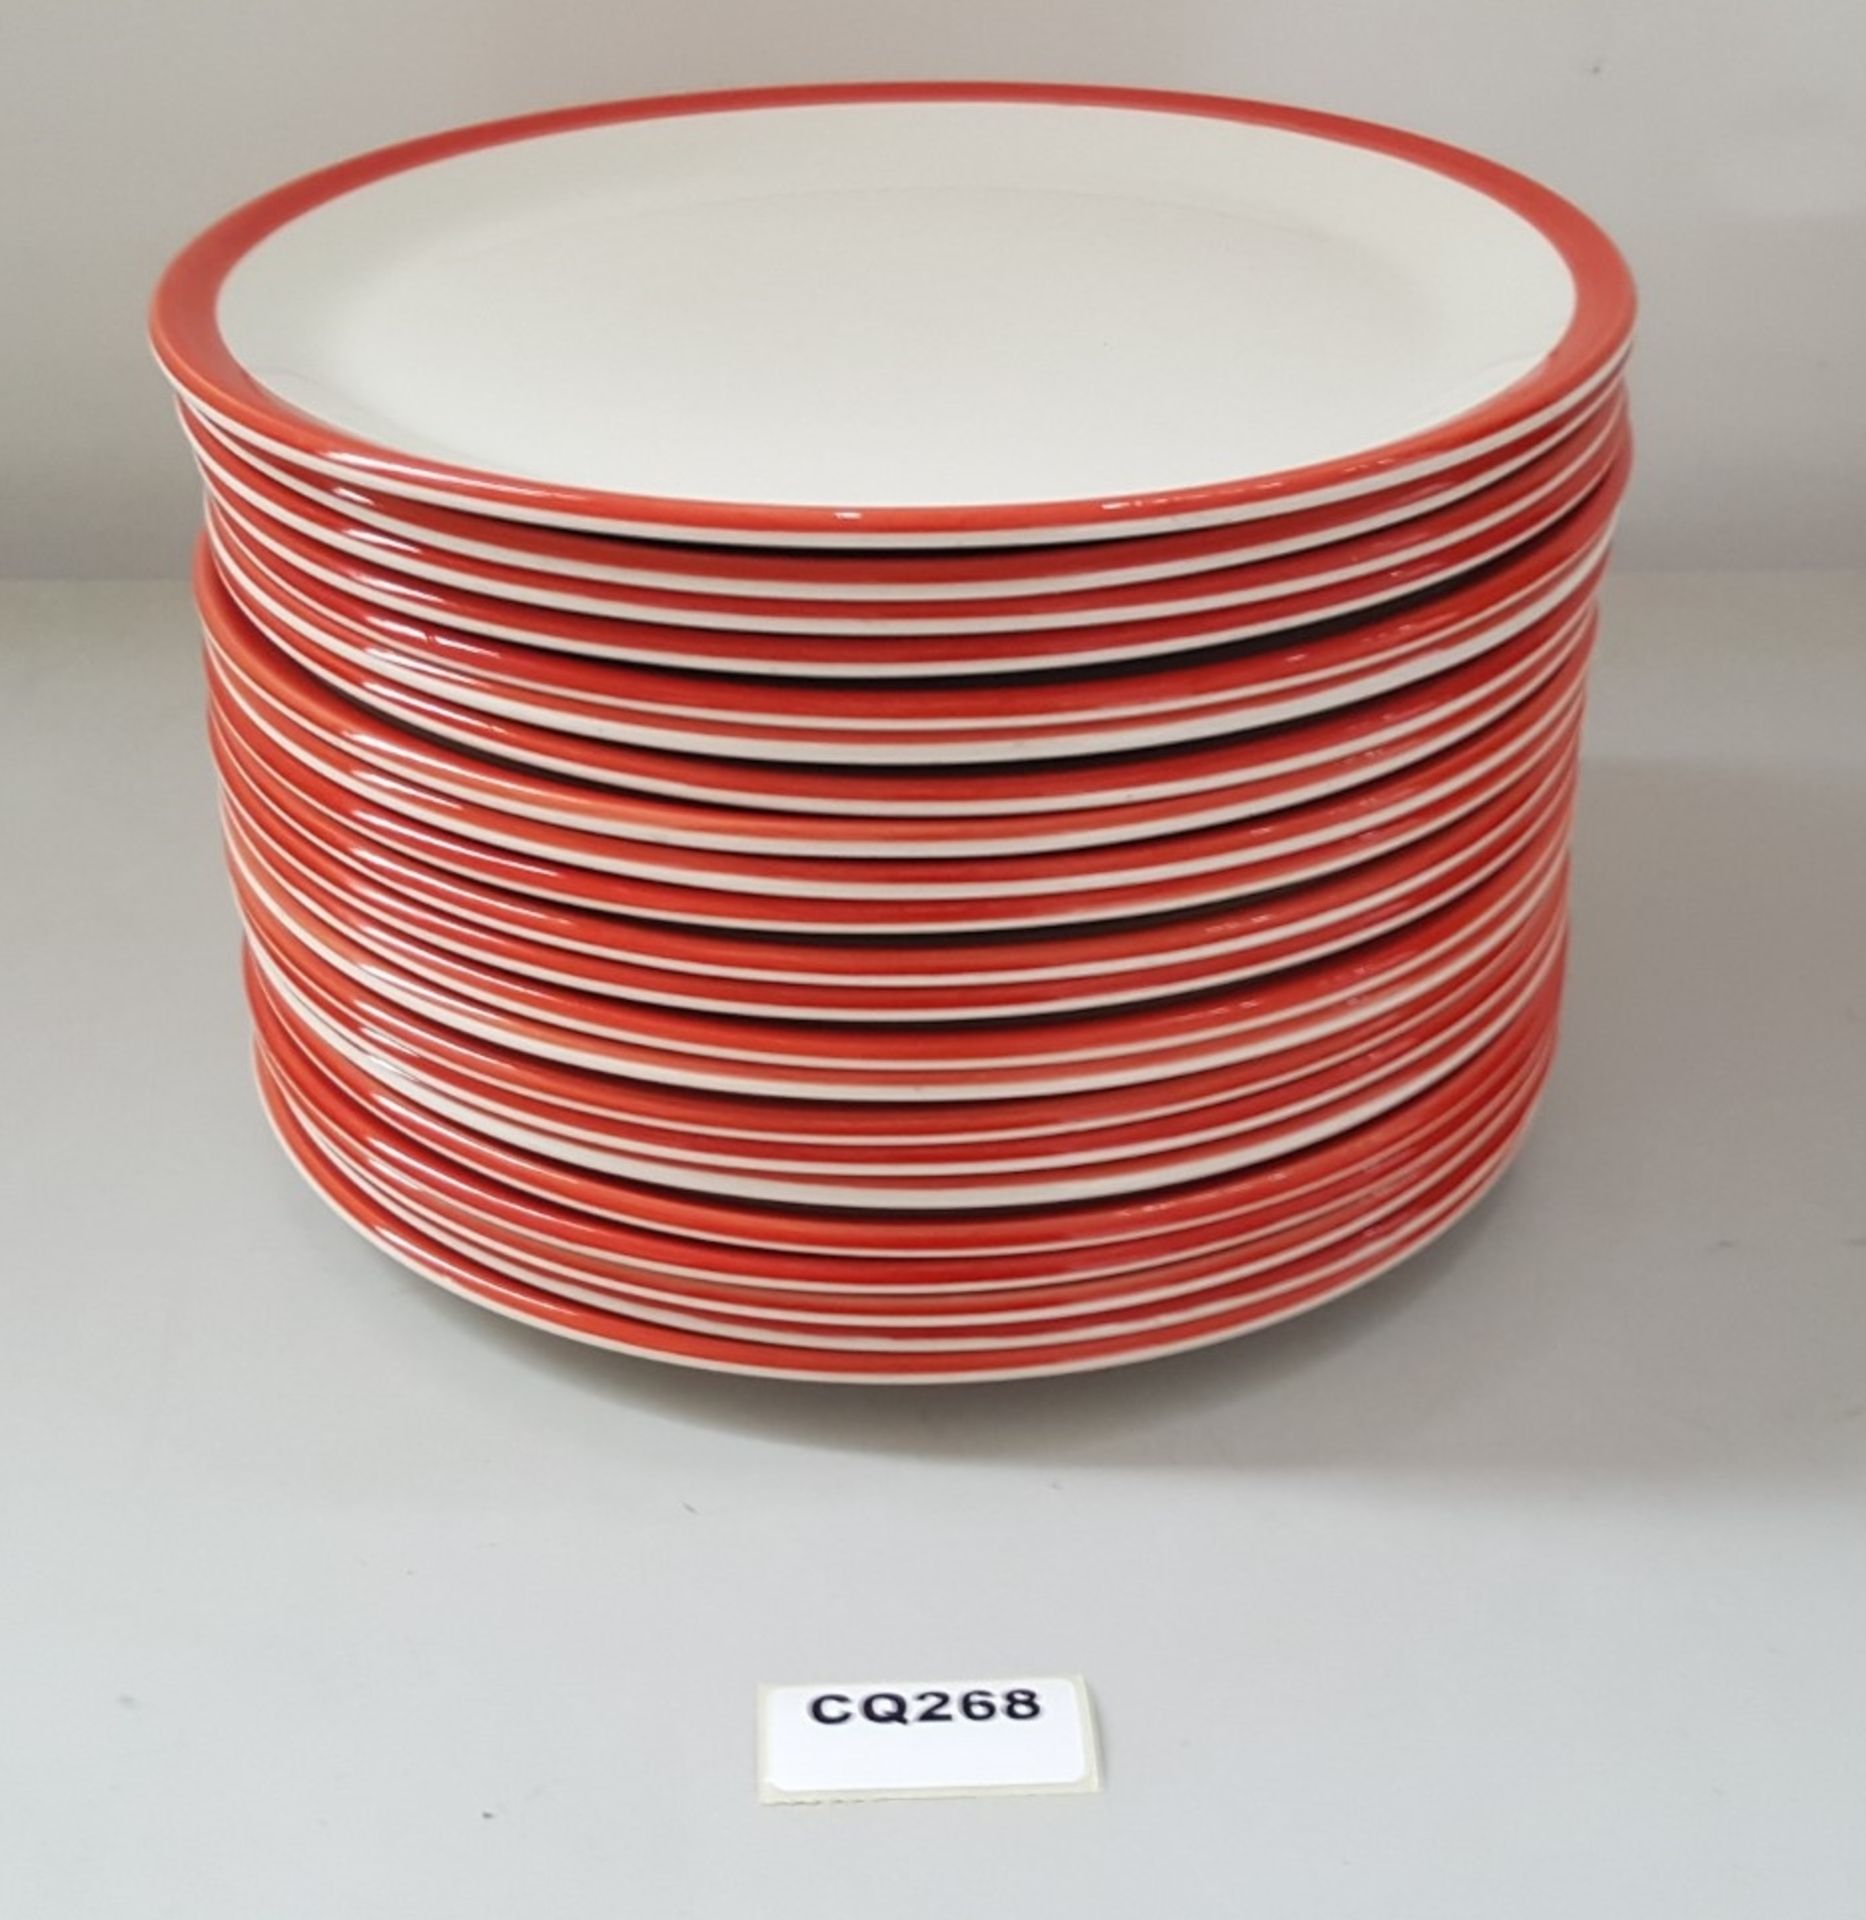 22 x Steelite Coupe Plates White With Red Outline Egde 27.5CM - Ref CQ268 - Image 4 of 4